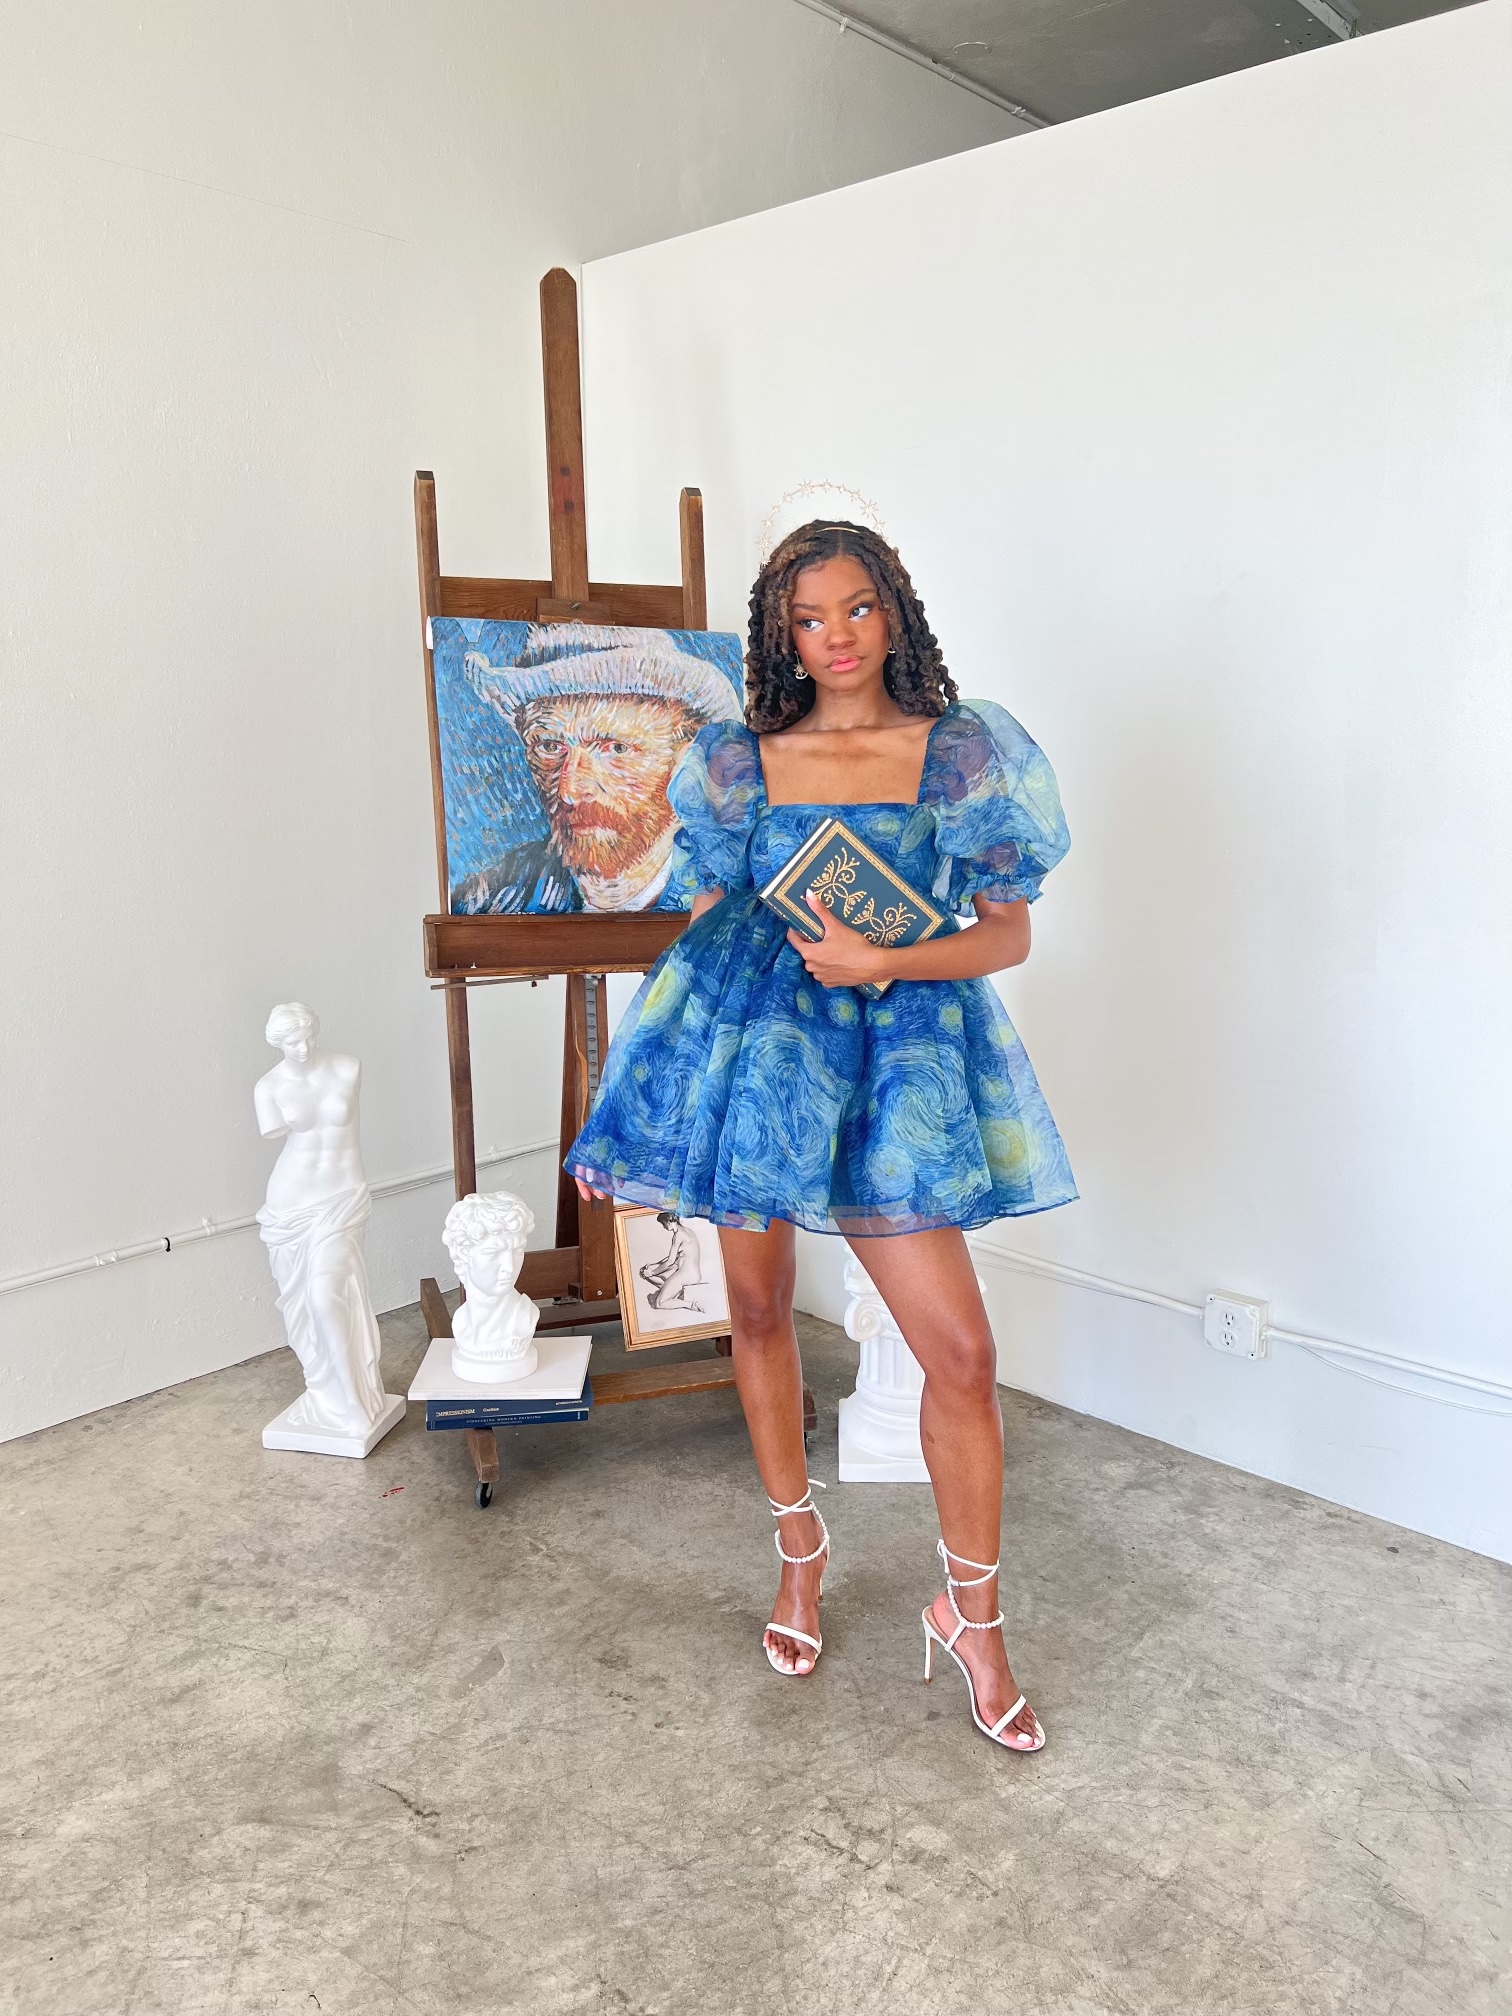 Chazlyn Stunson stands indoors next to a painting of Van Gogh